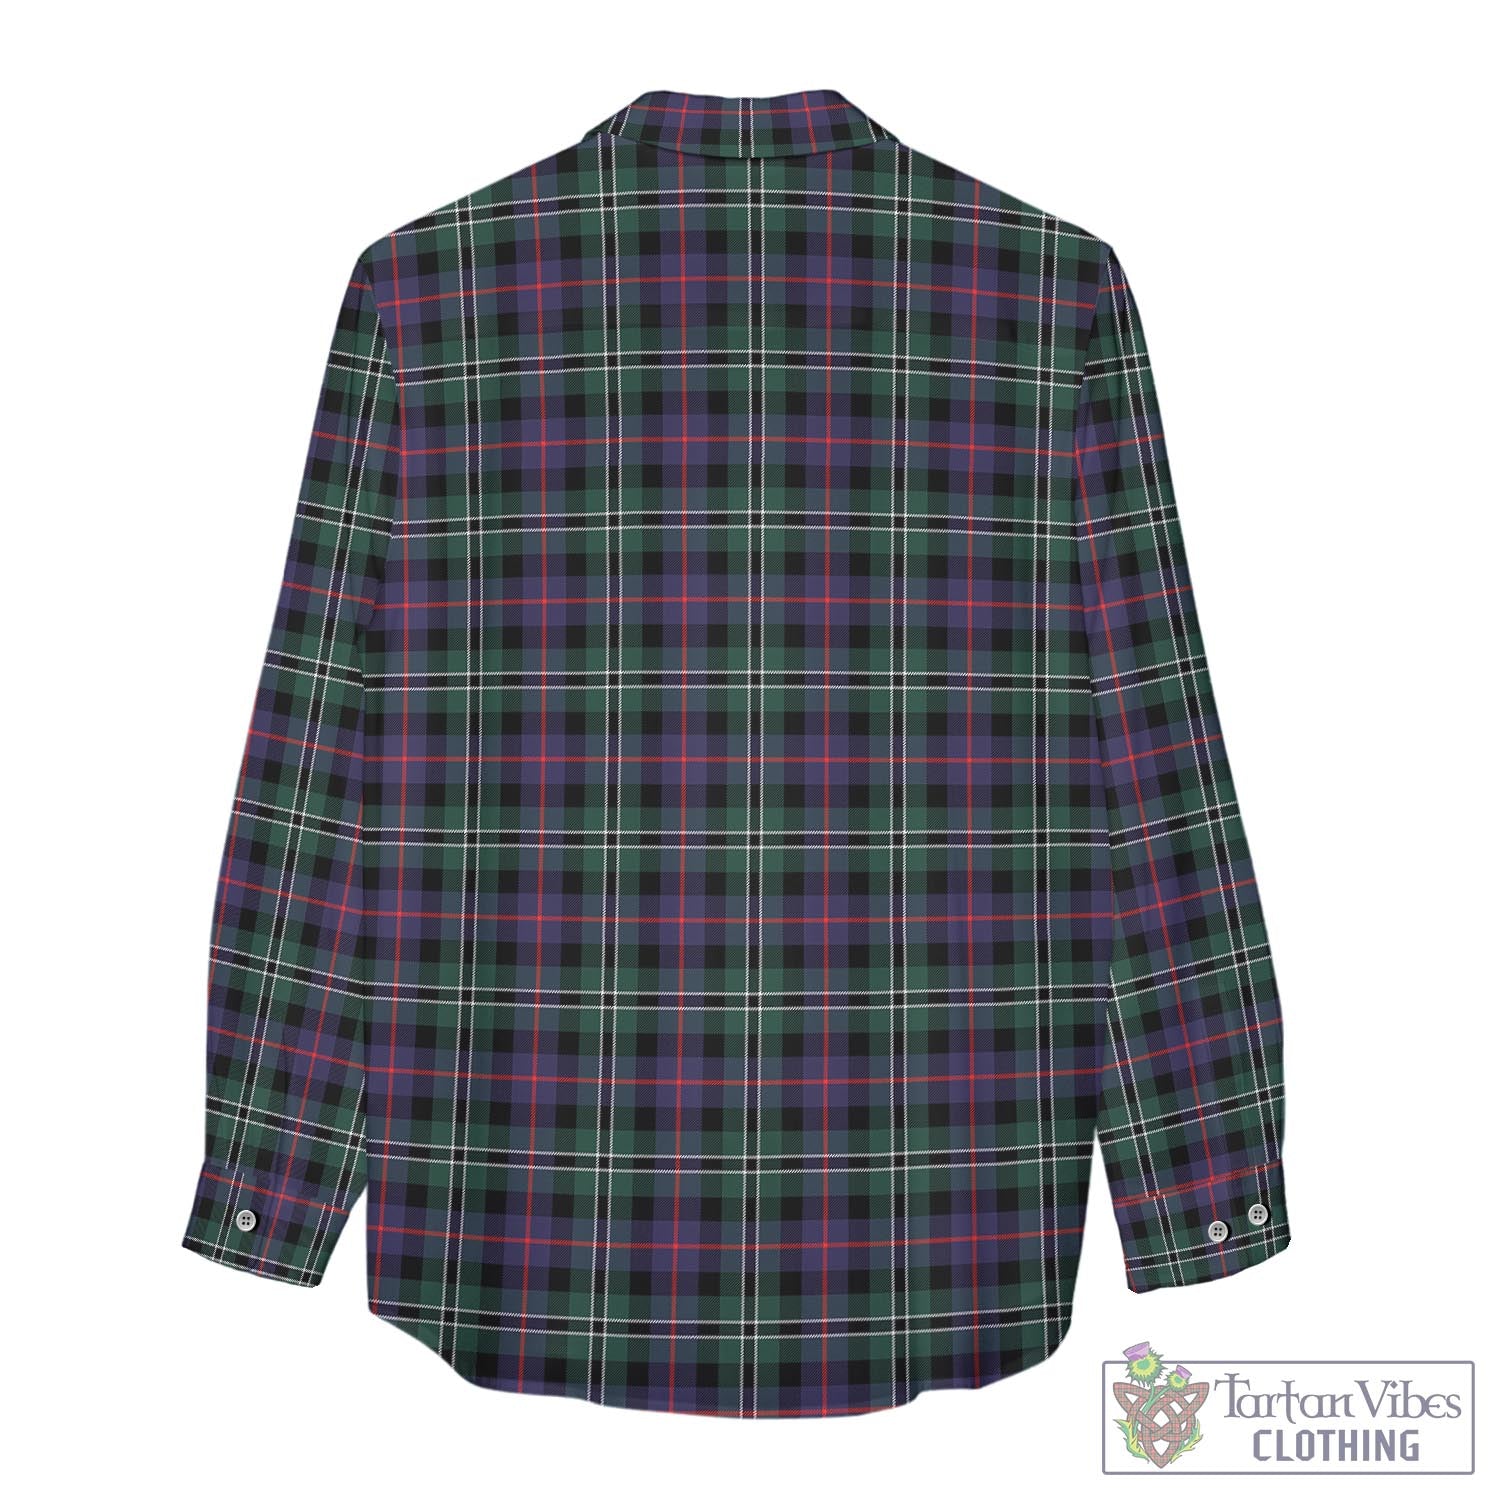 Tartan Vibes Clothing Rose Hunting Modern Tartan Womens Casual Shirt with Family Crest